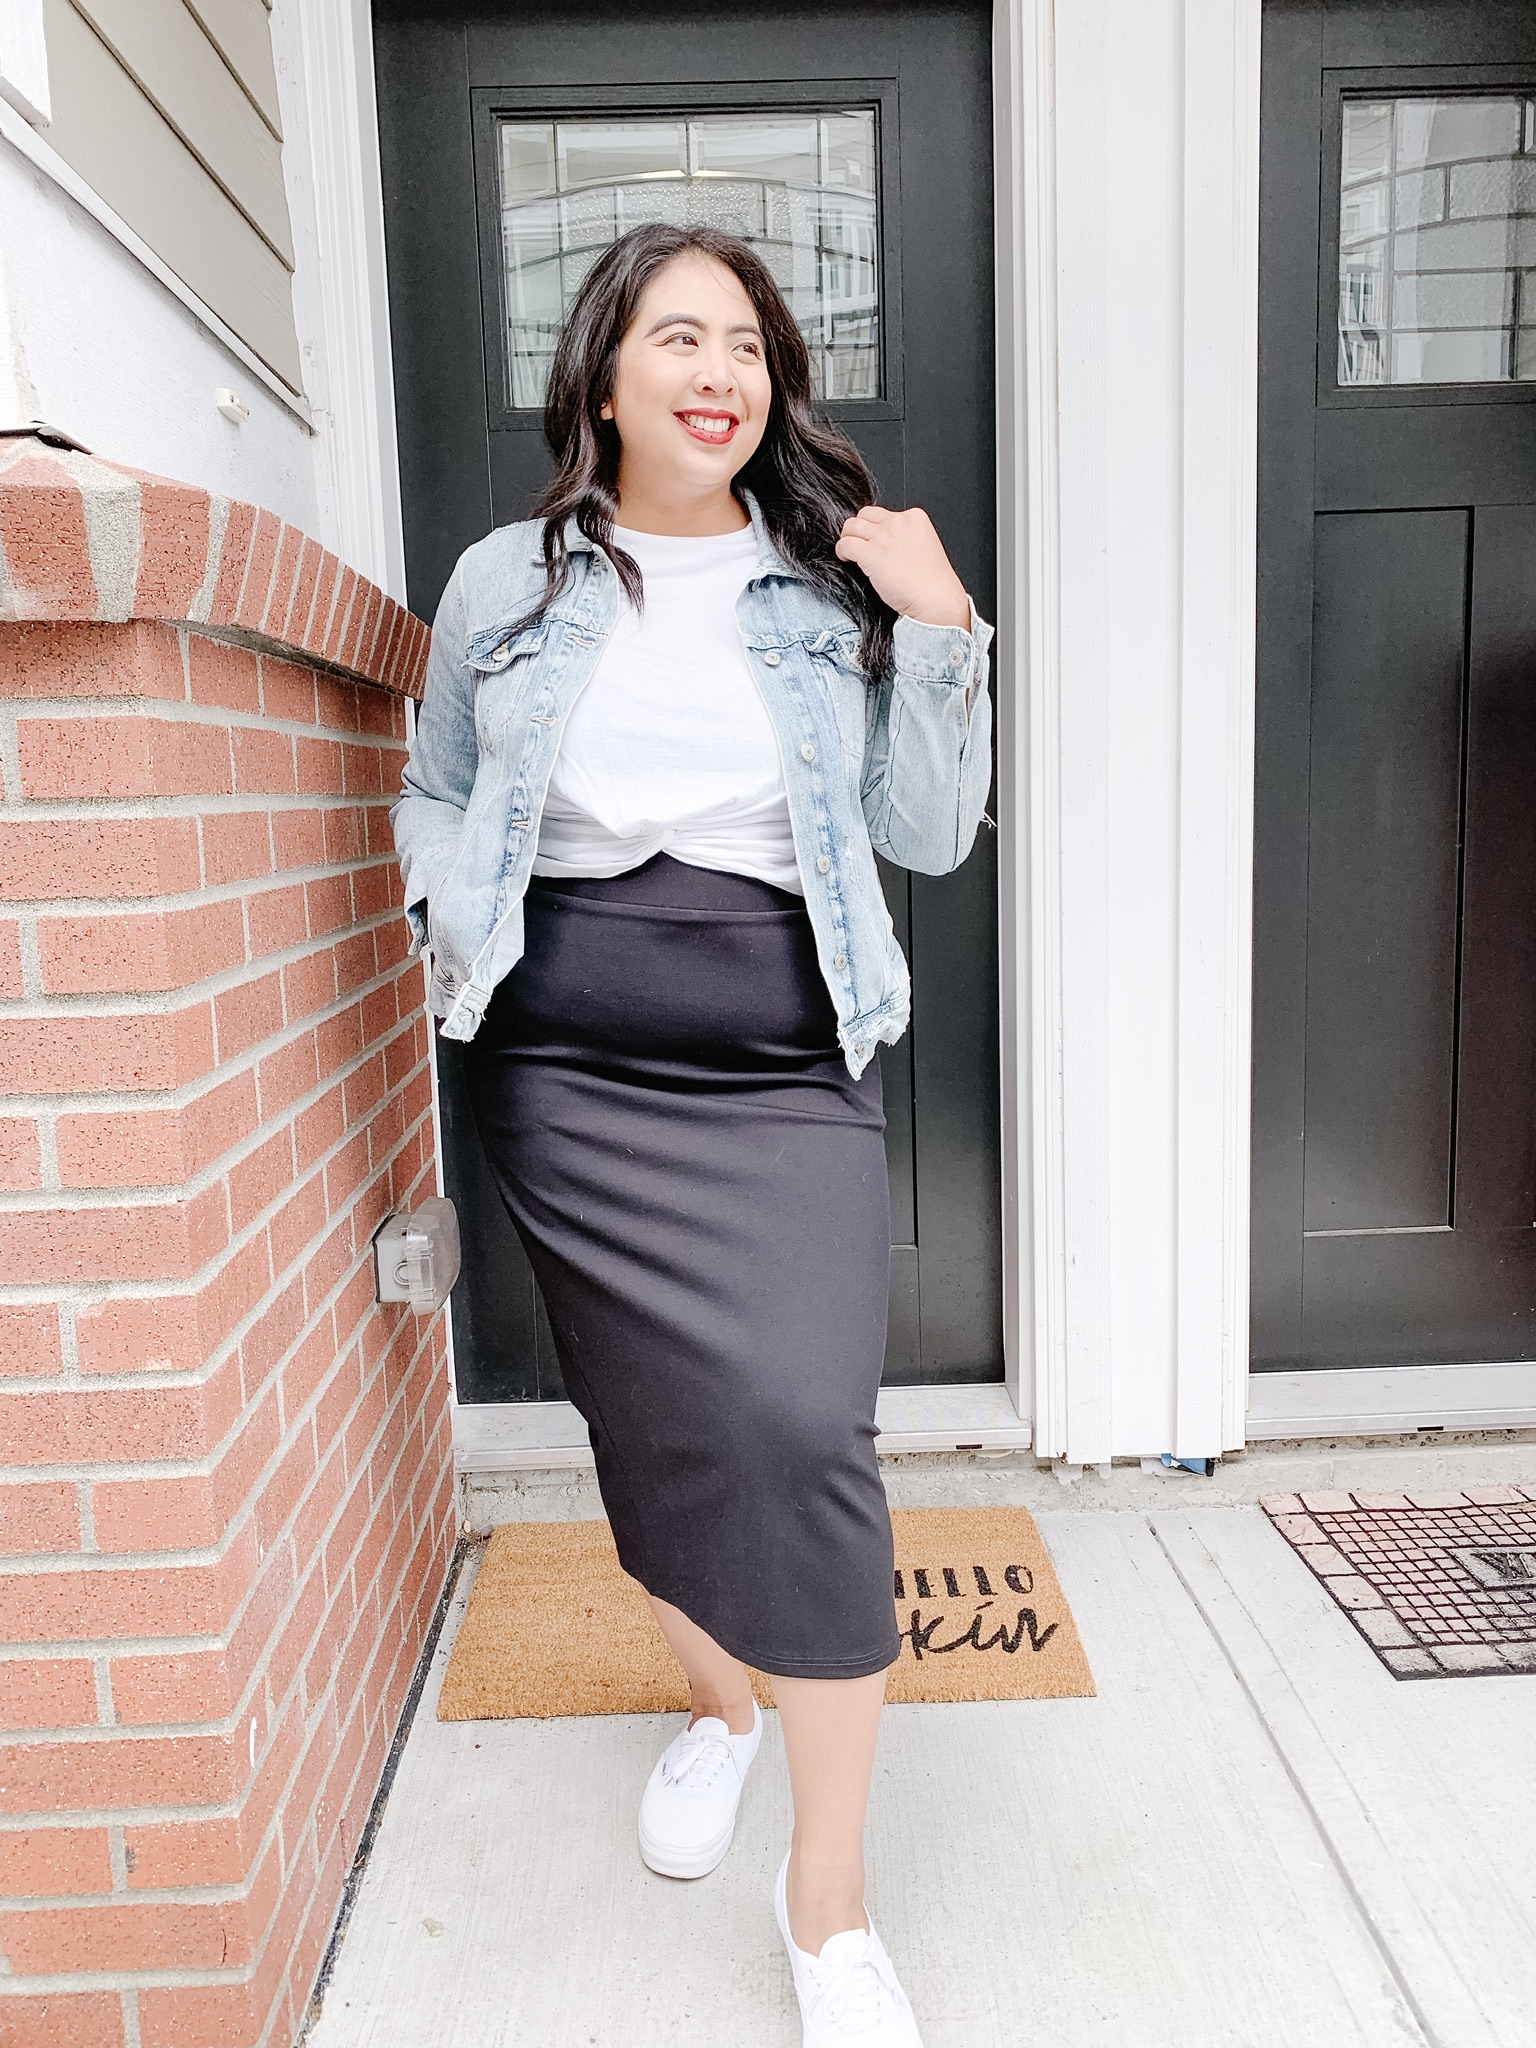 3 ways to wear a pencil skirt | Transitioning your wardrobe for fall | Fashion tips | Style tips | How to wear a black pencil skirt | How to wear a black pencil skirt for fall | How to wear a black pencil skirt casual | Black Pencil skirt fashion | Pencil Skirt | How to wear a Pencil Skirt